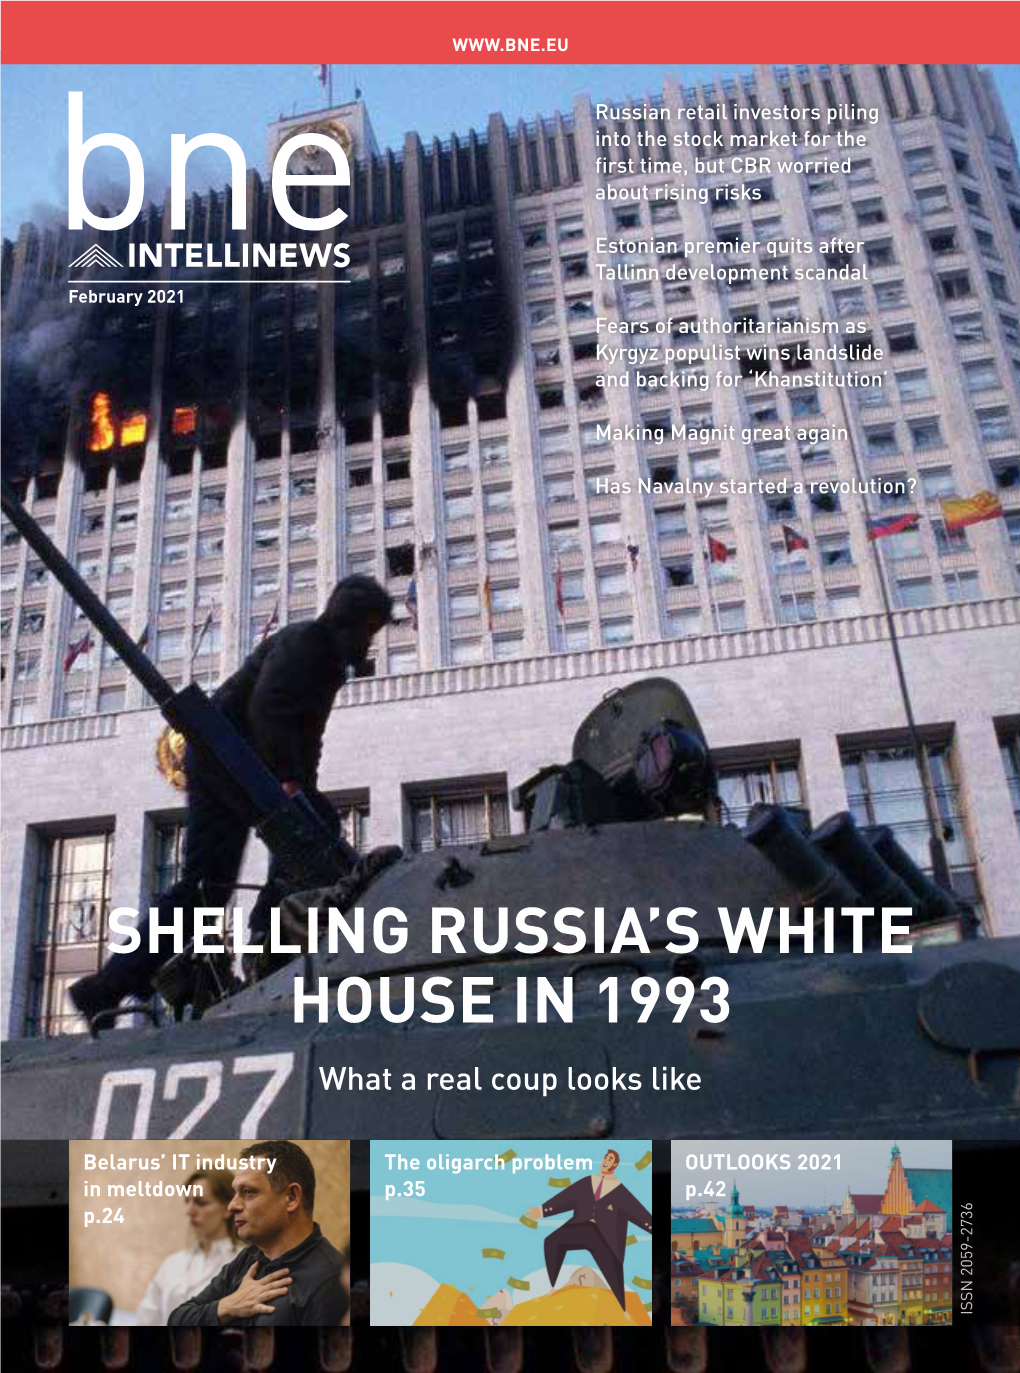 Shelling Russia's White House in 1993